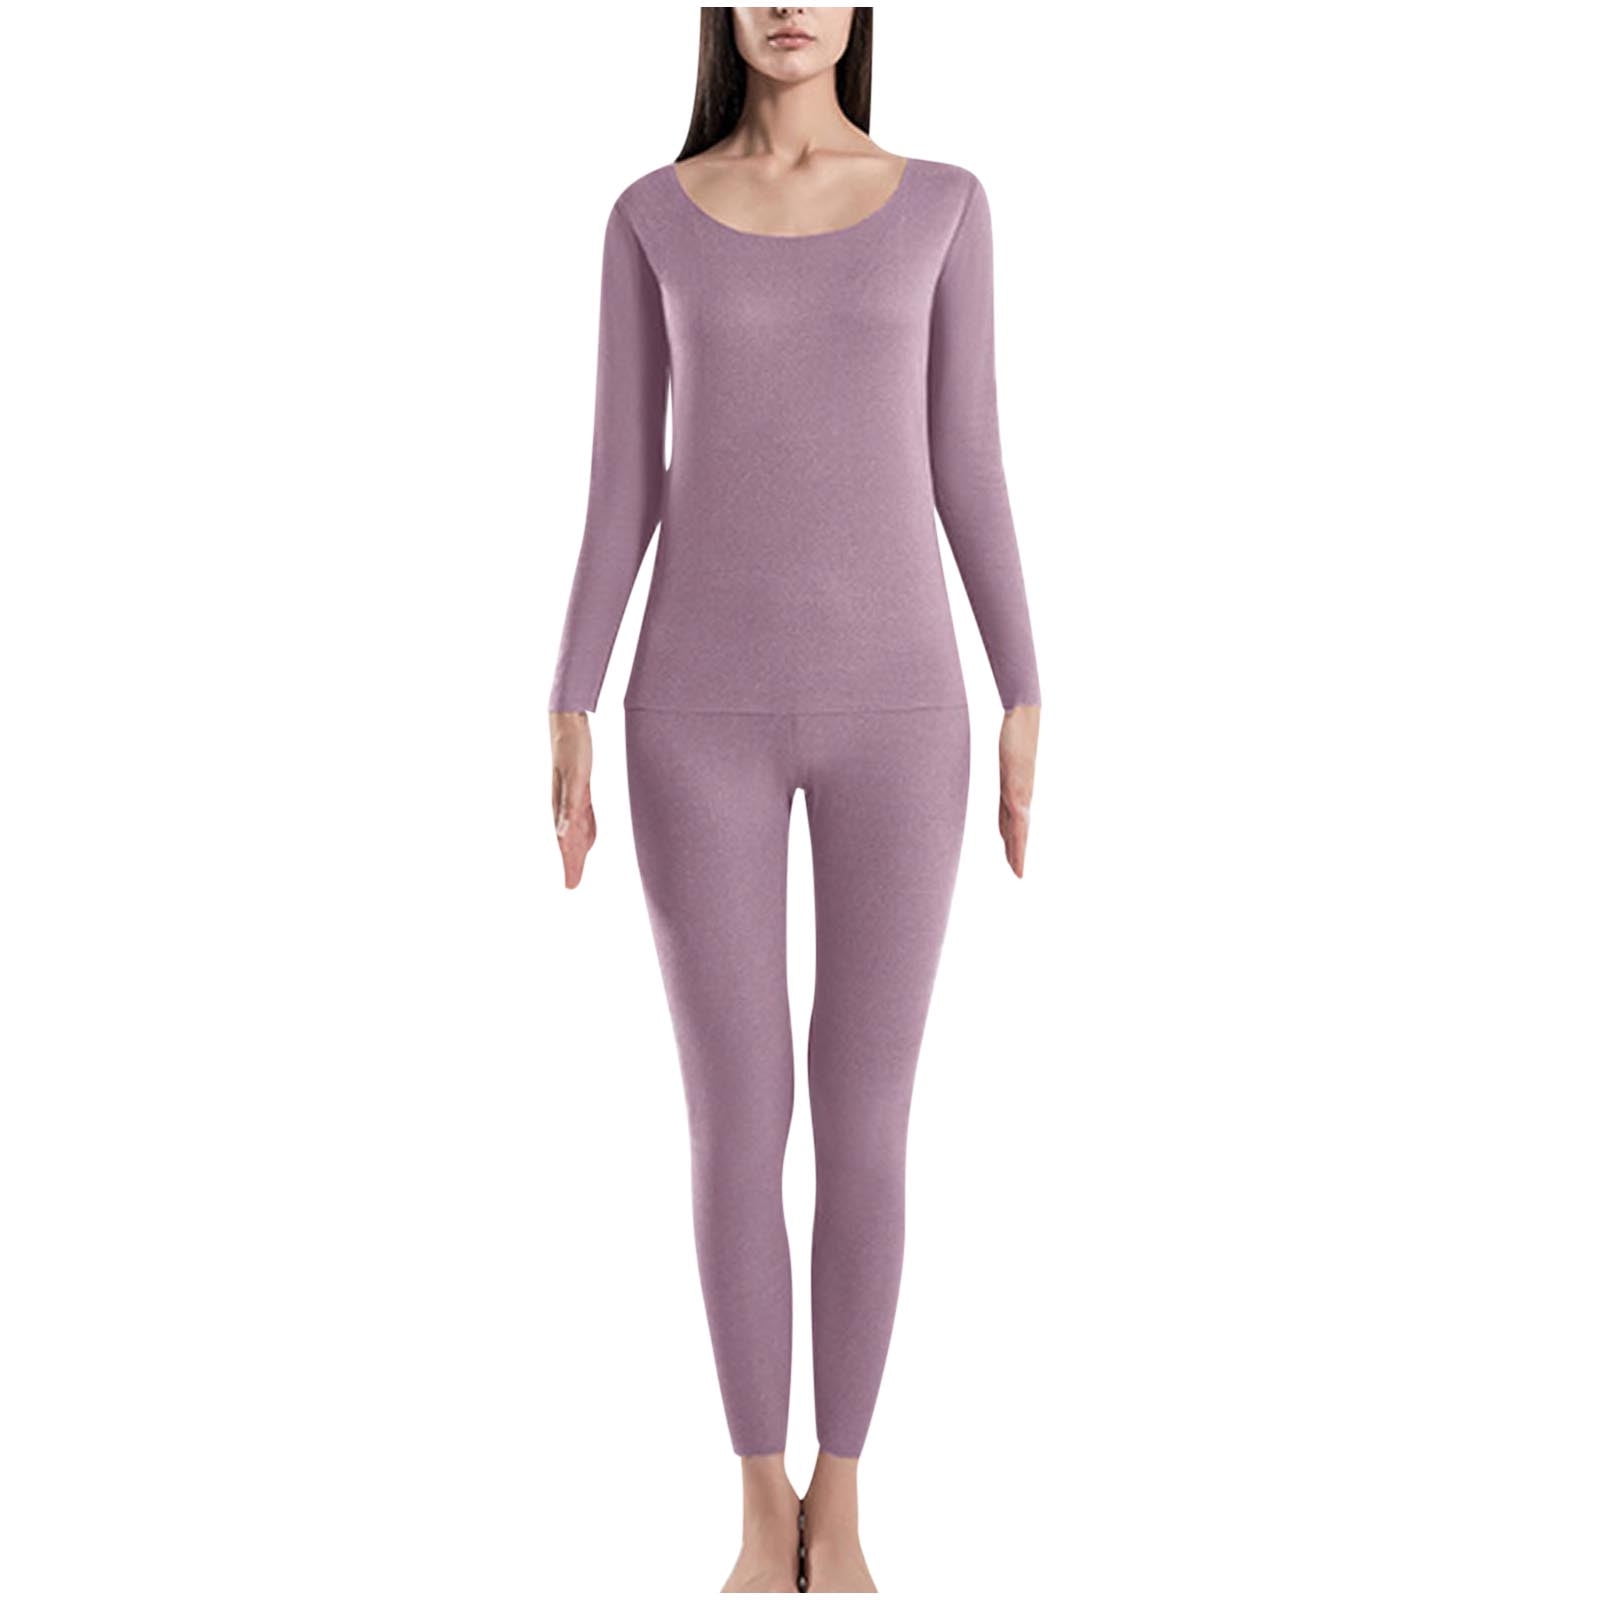 Warm Cotton Blend Ladies Thermal Wear at Rs 750/set in Agra